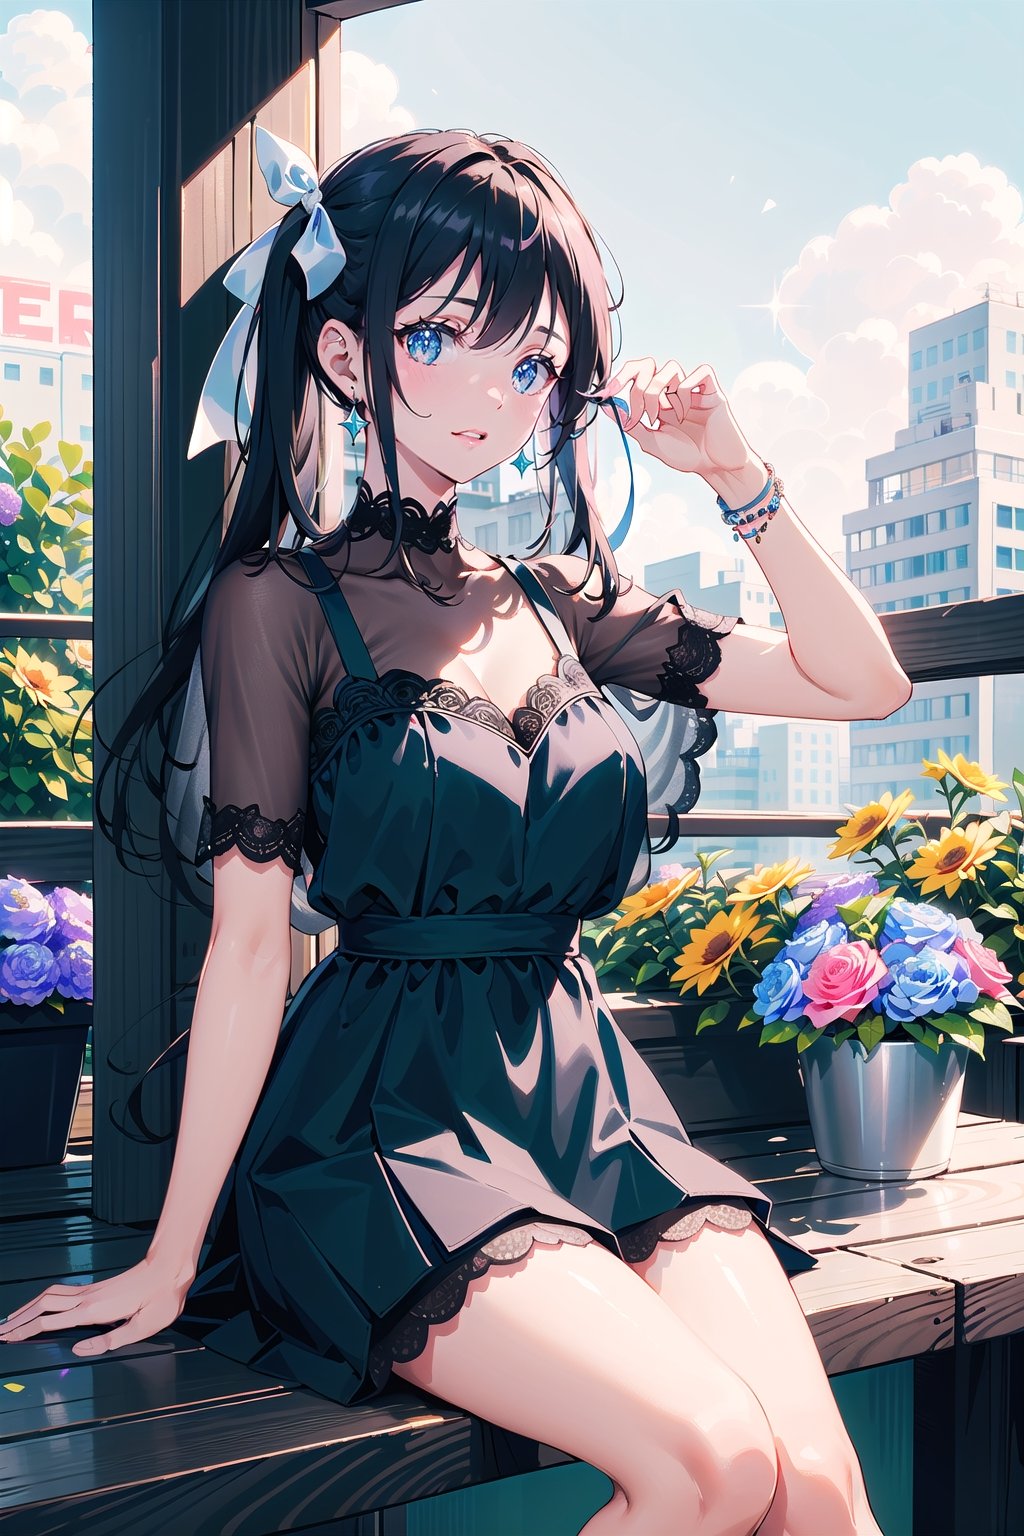 masterpiece, best quality, 1 girl, flowers, floral background, nature, pose, perfect hands, modern outfit, detailed, sparkling, sitting, lace detail, long hair, ultra detailed, ultra detailed face, clear eyes, good lighting,, perfect anatomy, stylish casual outfit, jewelry, different hairstyles, hair ribbons